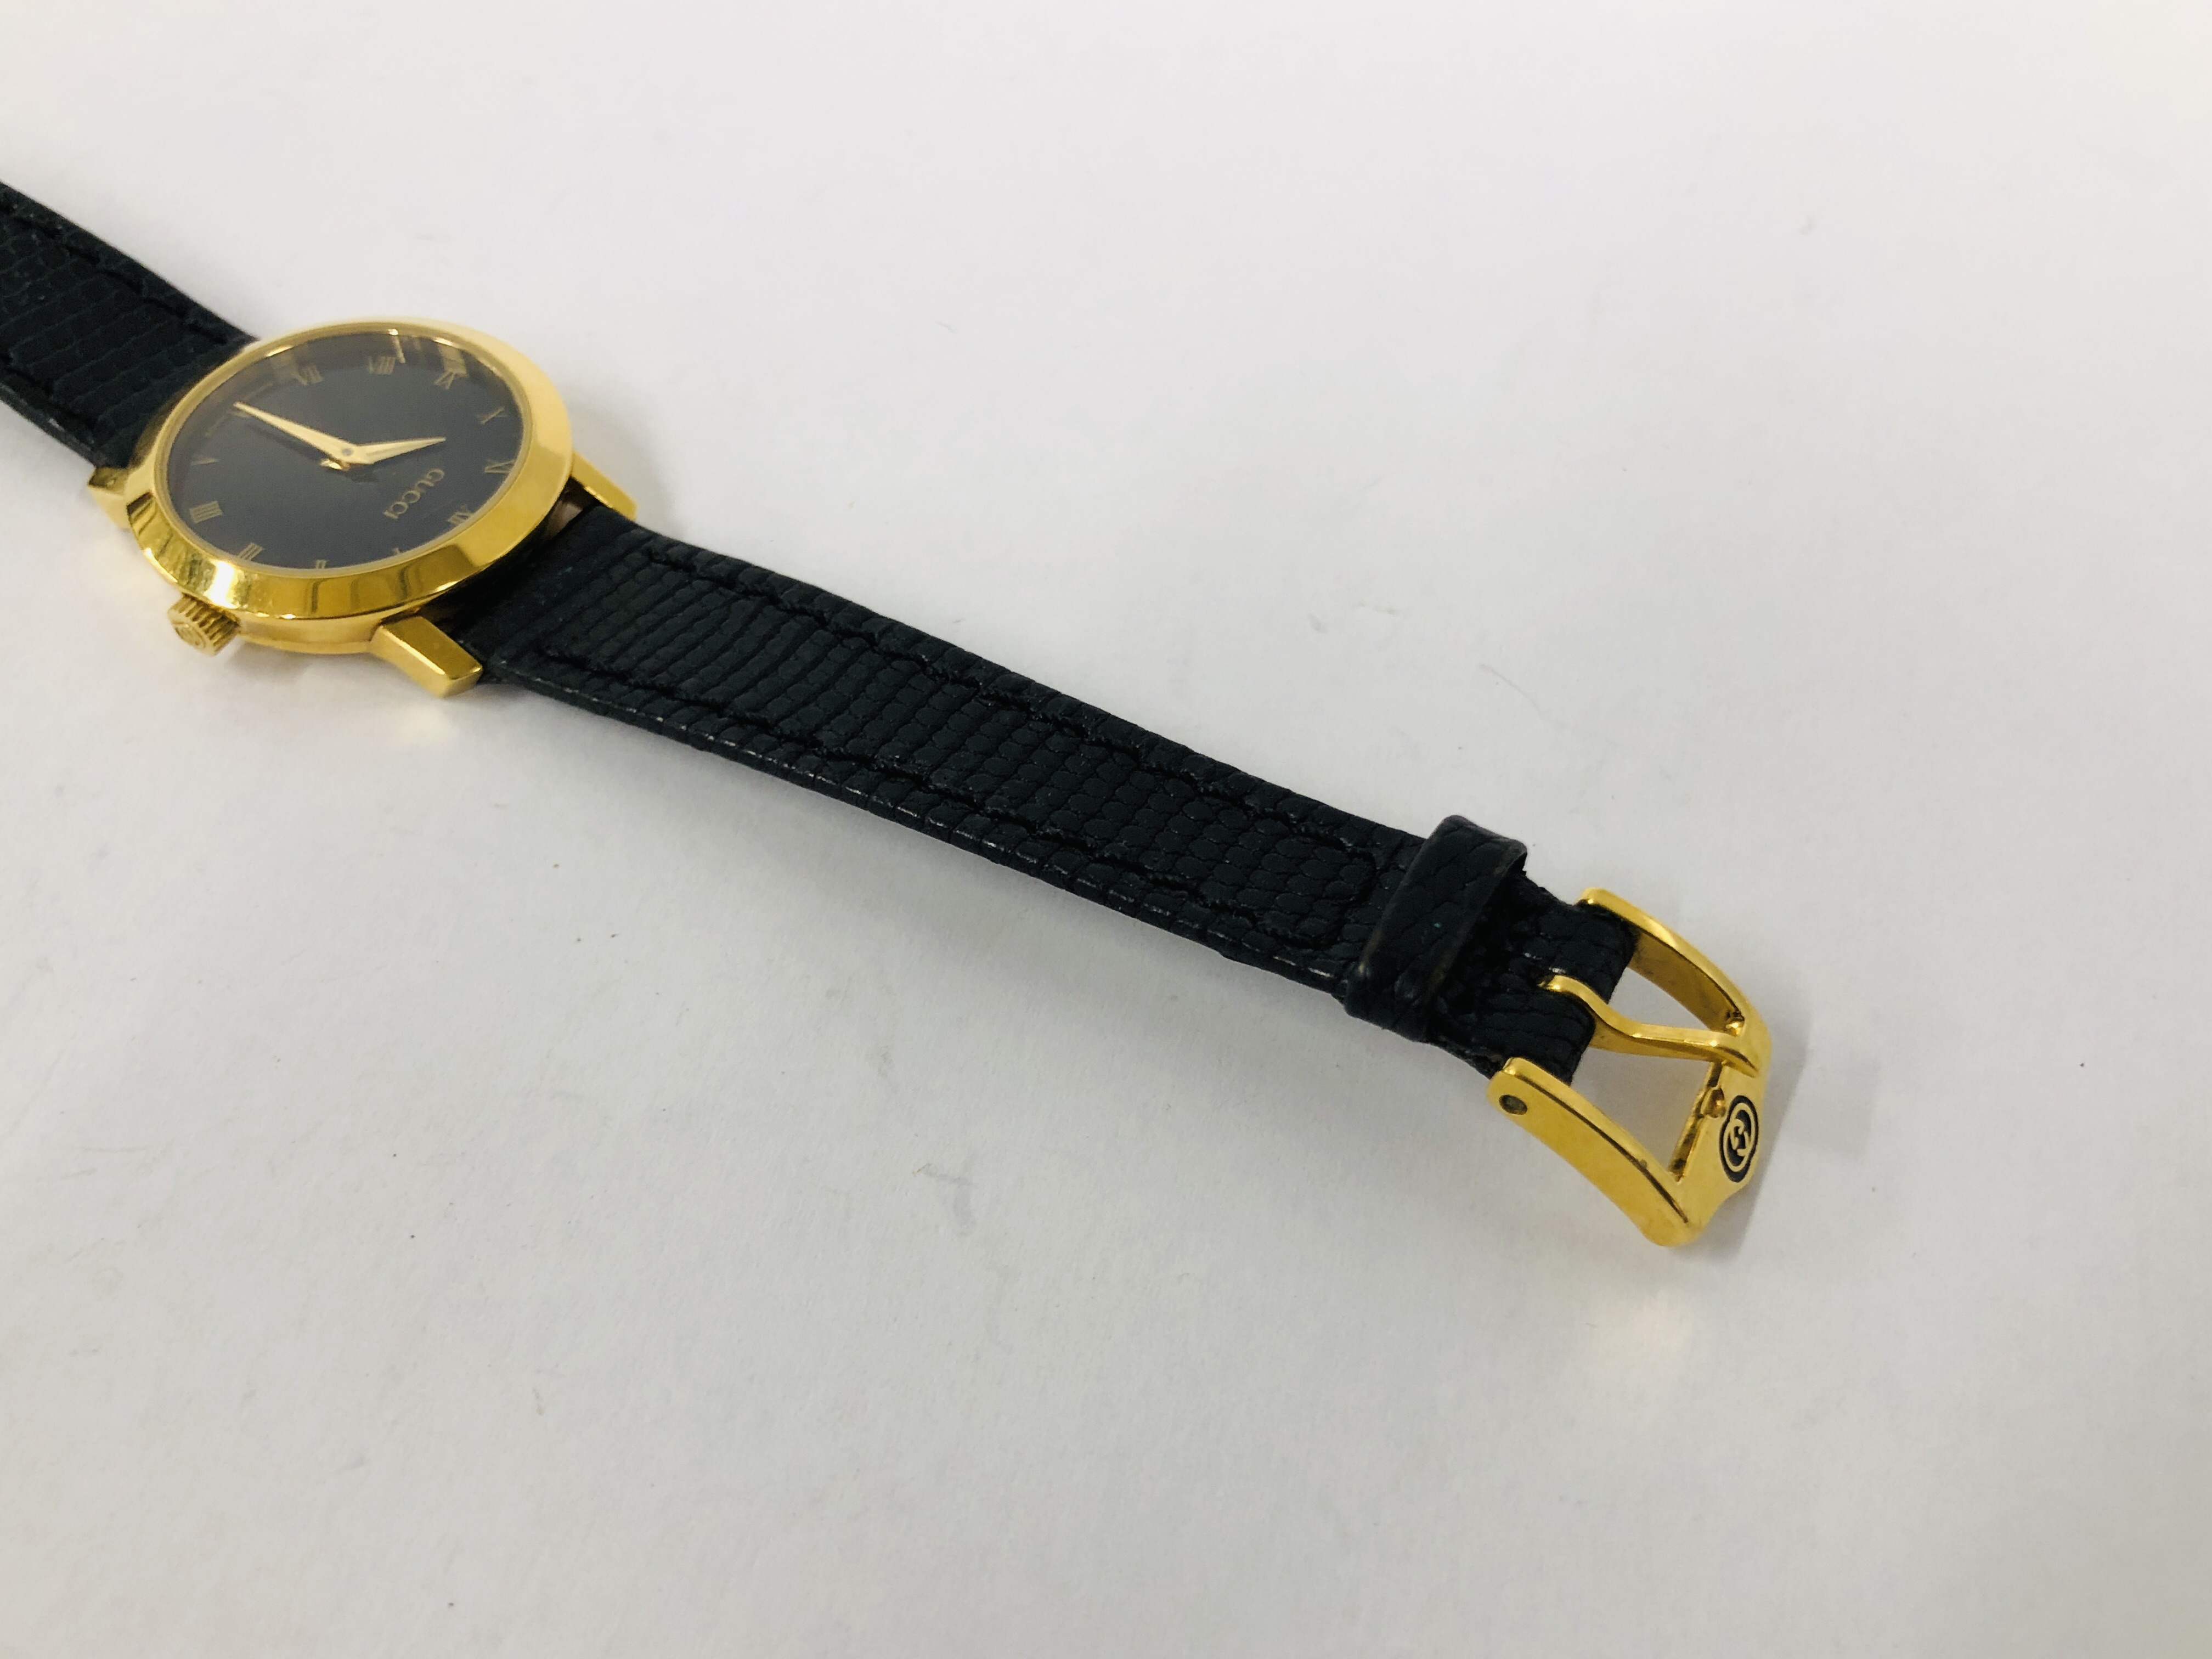 LADIES WRIST WATCH MARKED GUCCI MODEL NO. 2200L SERIAL NO. - Image 5 of 16